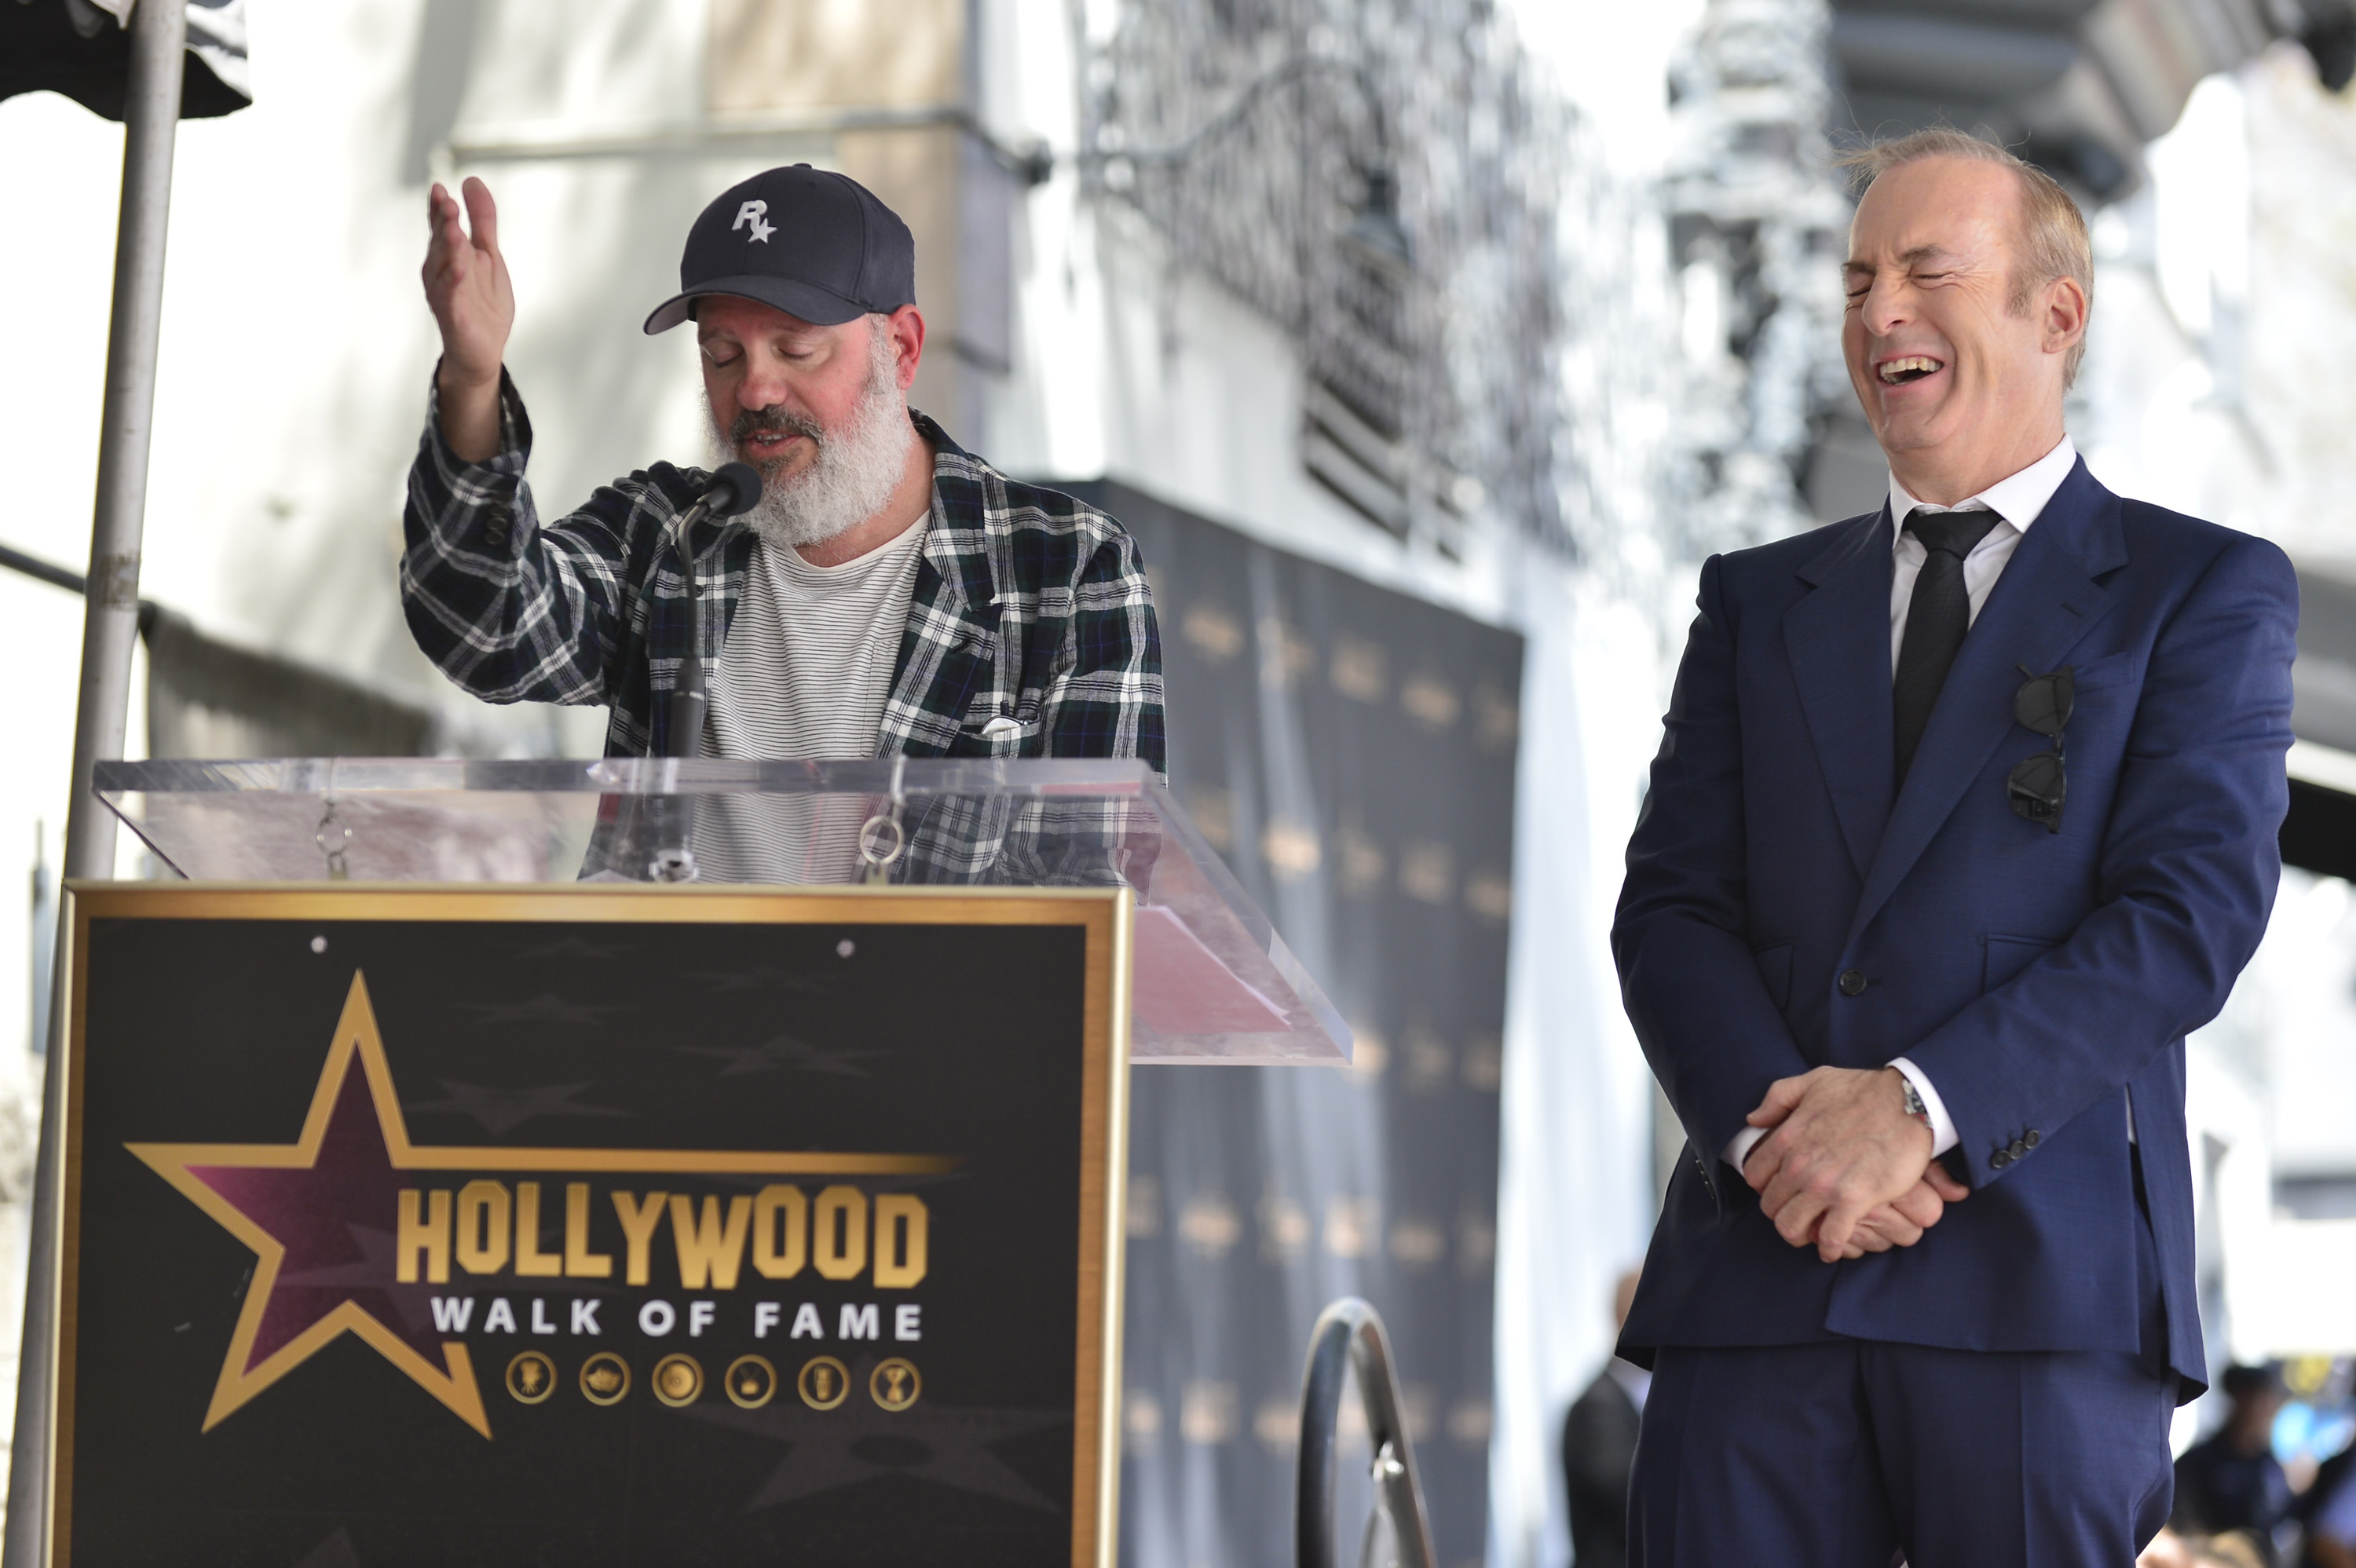 David Cross attends as Bob Odenkirk is honored with a star on the Hollywood Walk of Fame on April 18, 2022, in Hollywood, Calif.